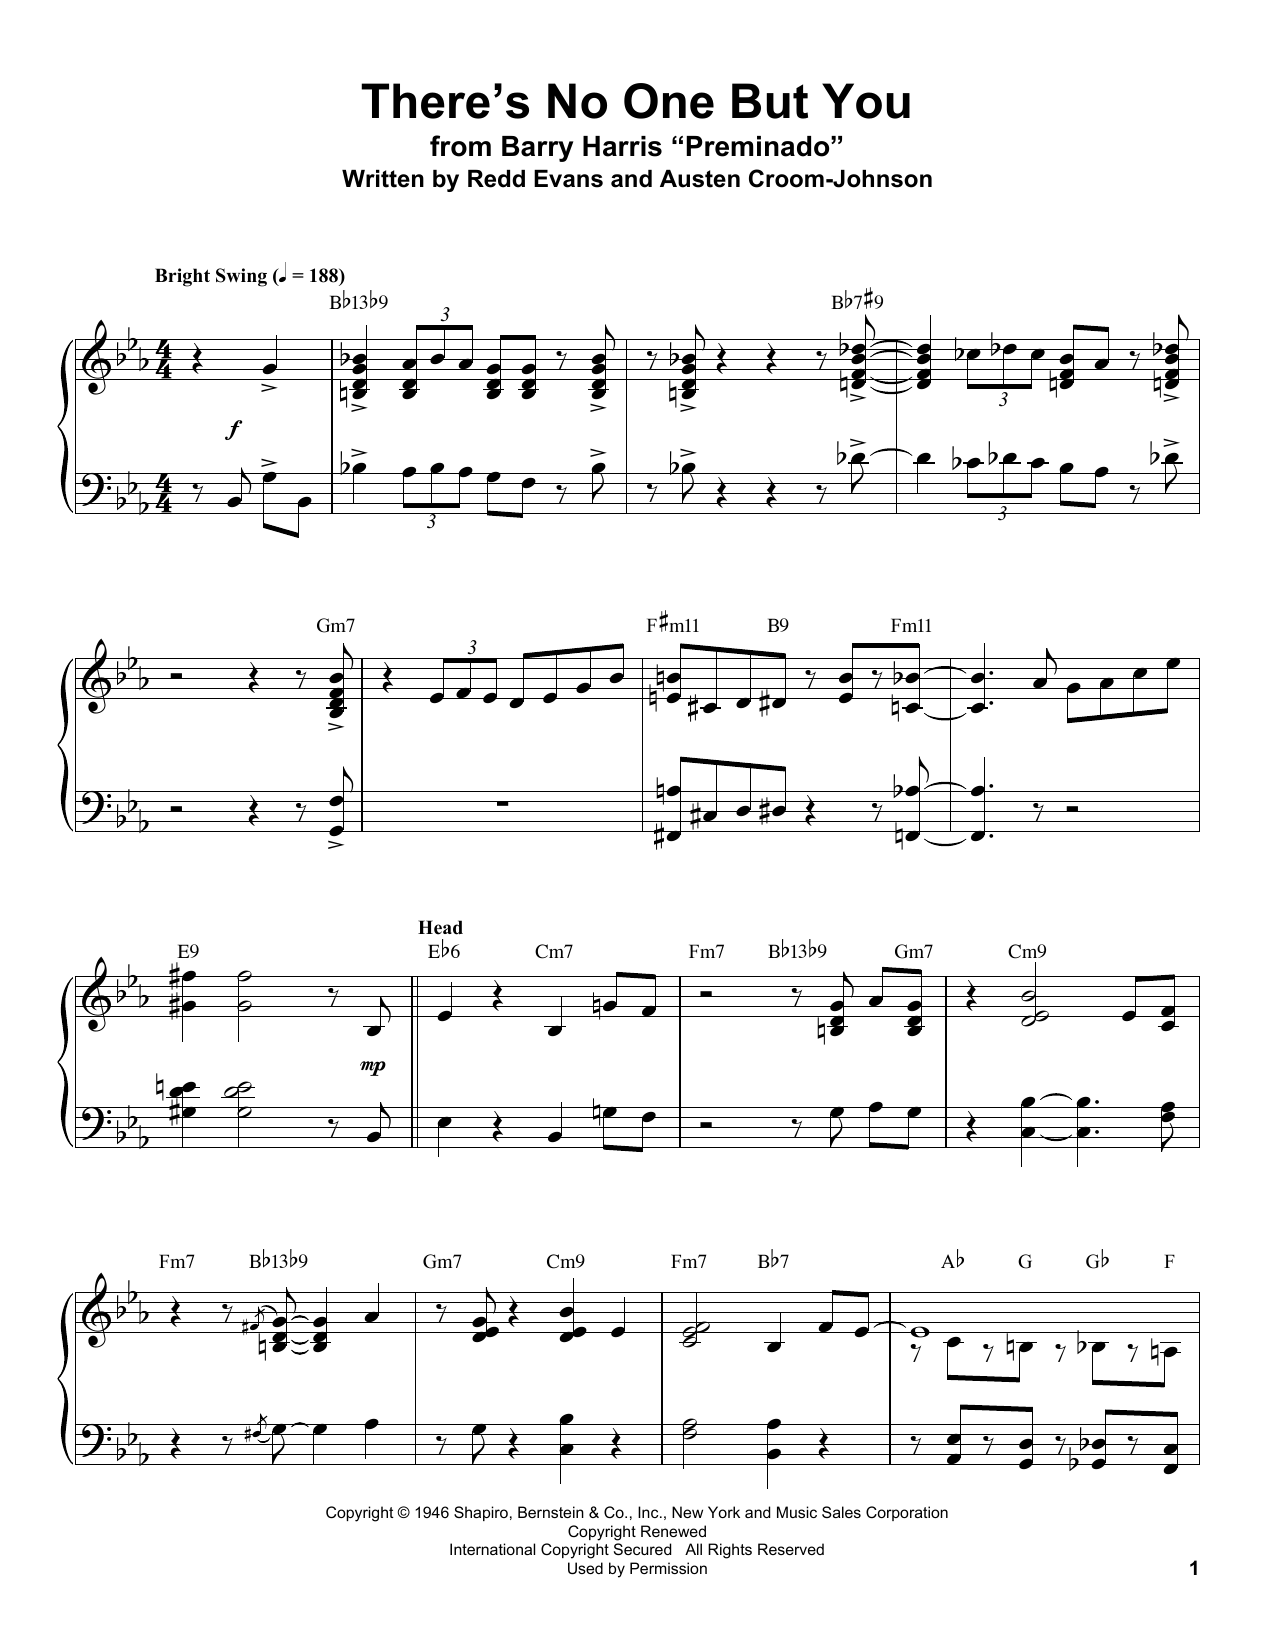 Download Redd Evans There's No One But You Sheet Music